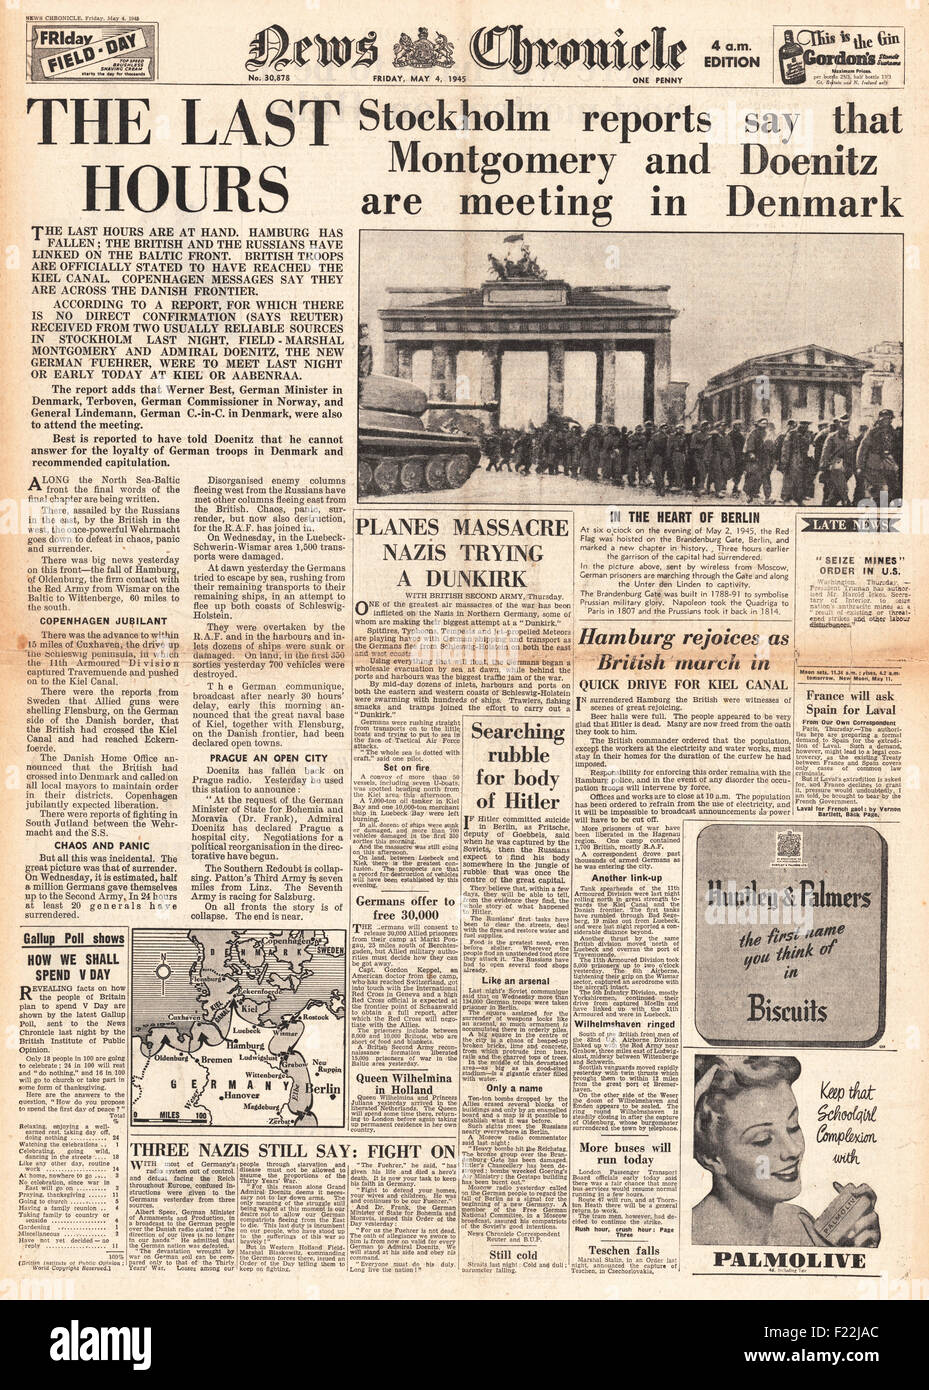 1945 News Chronicle front page reporting Last Hours of the Third Reich Stock Photo